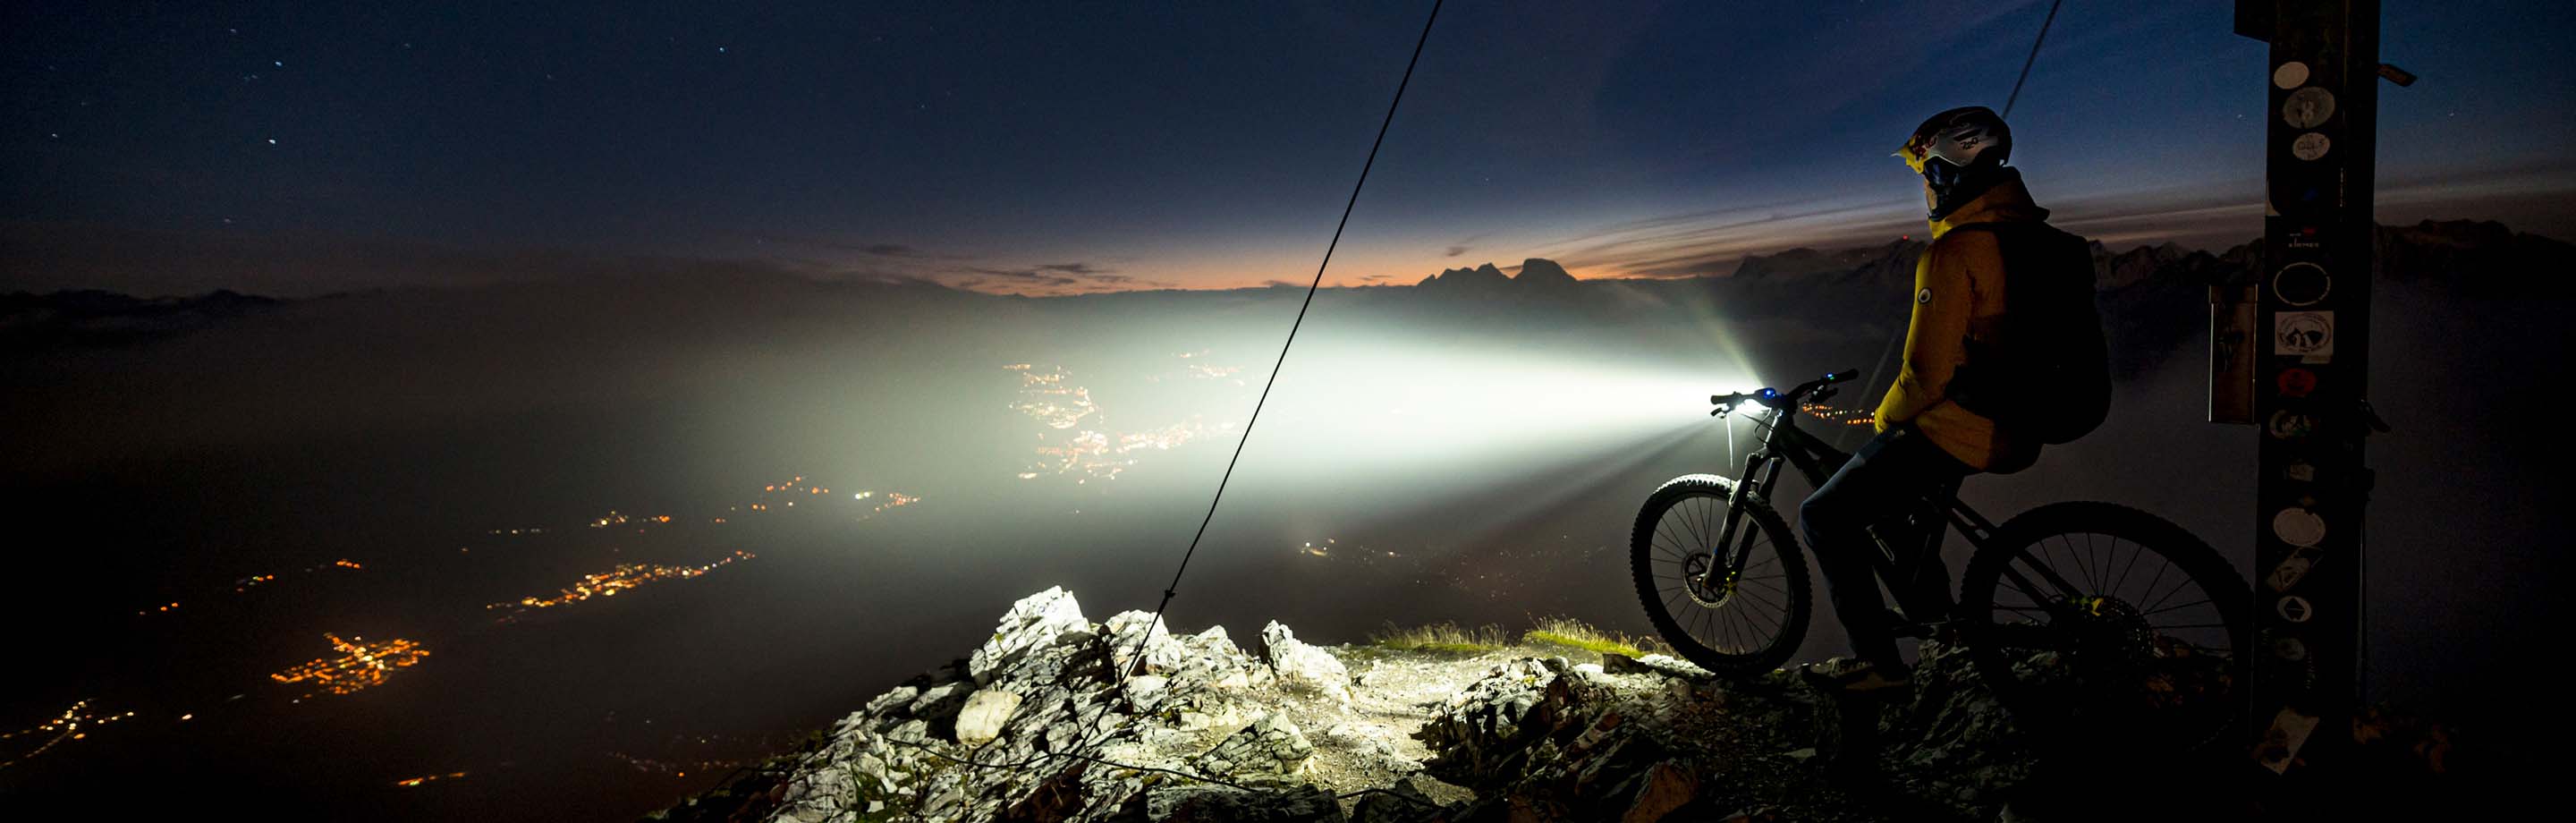 Lupine – Technology leader in mountainbike and outdoor lighting